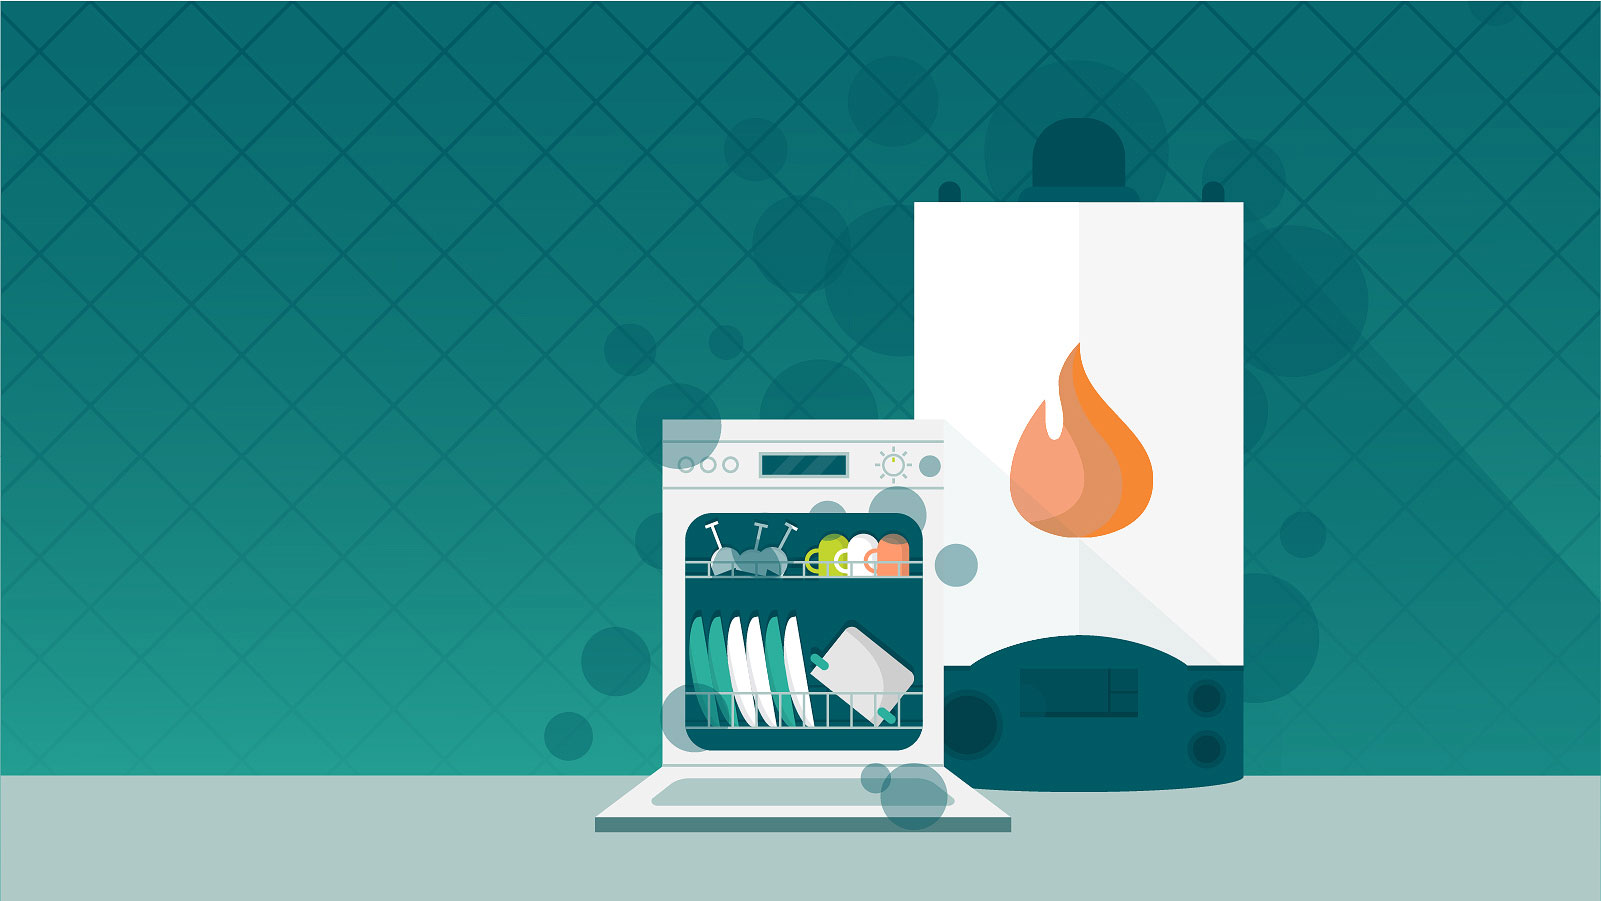 Graphic of a dishwasher and furnace on a teal background 